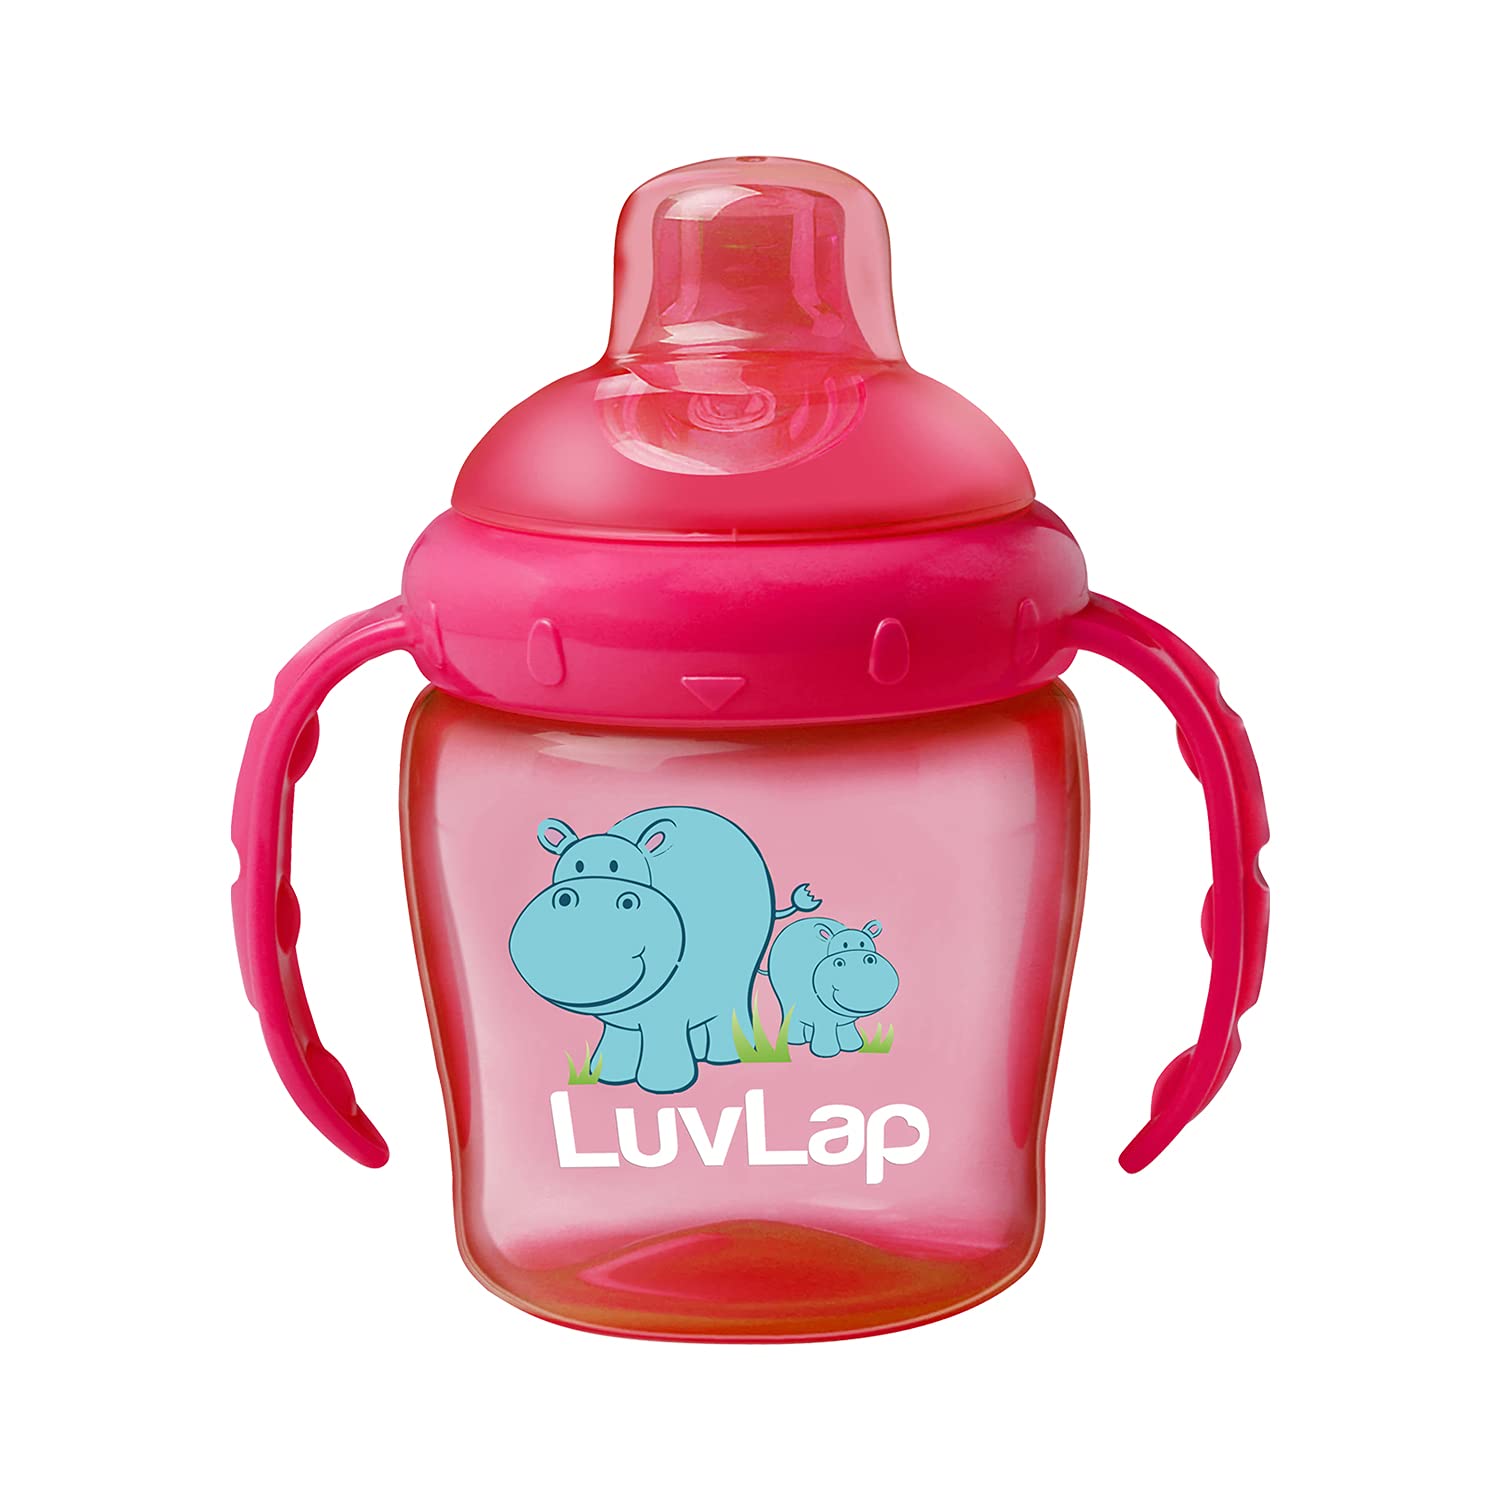 Luvlap Hippo Sipper / Sippy Cup 225ml